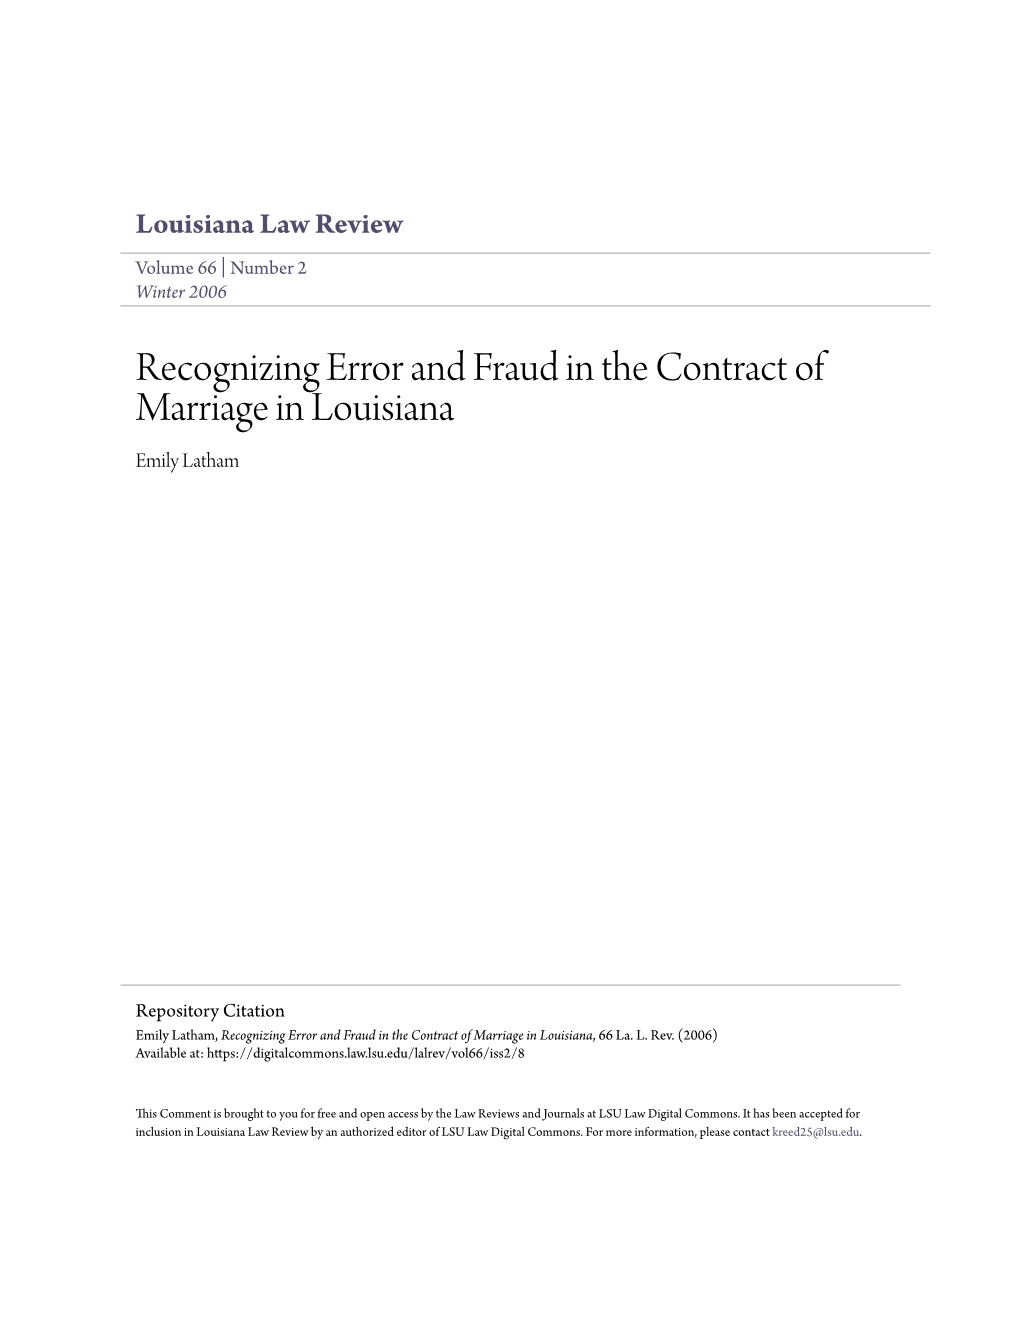 Recognizing Error and Fraud in the Contract of Marriage in Louisiana Emily Latham